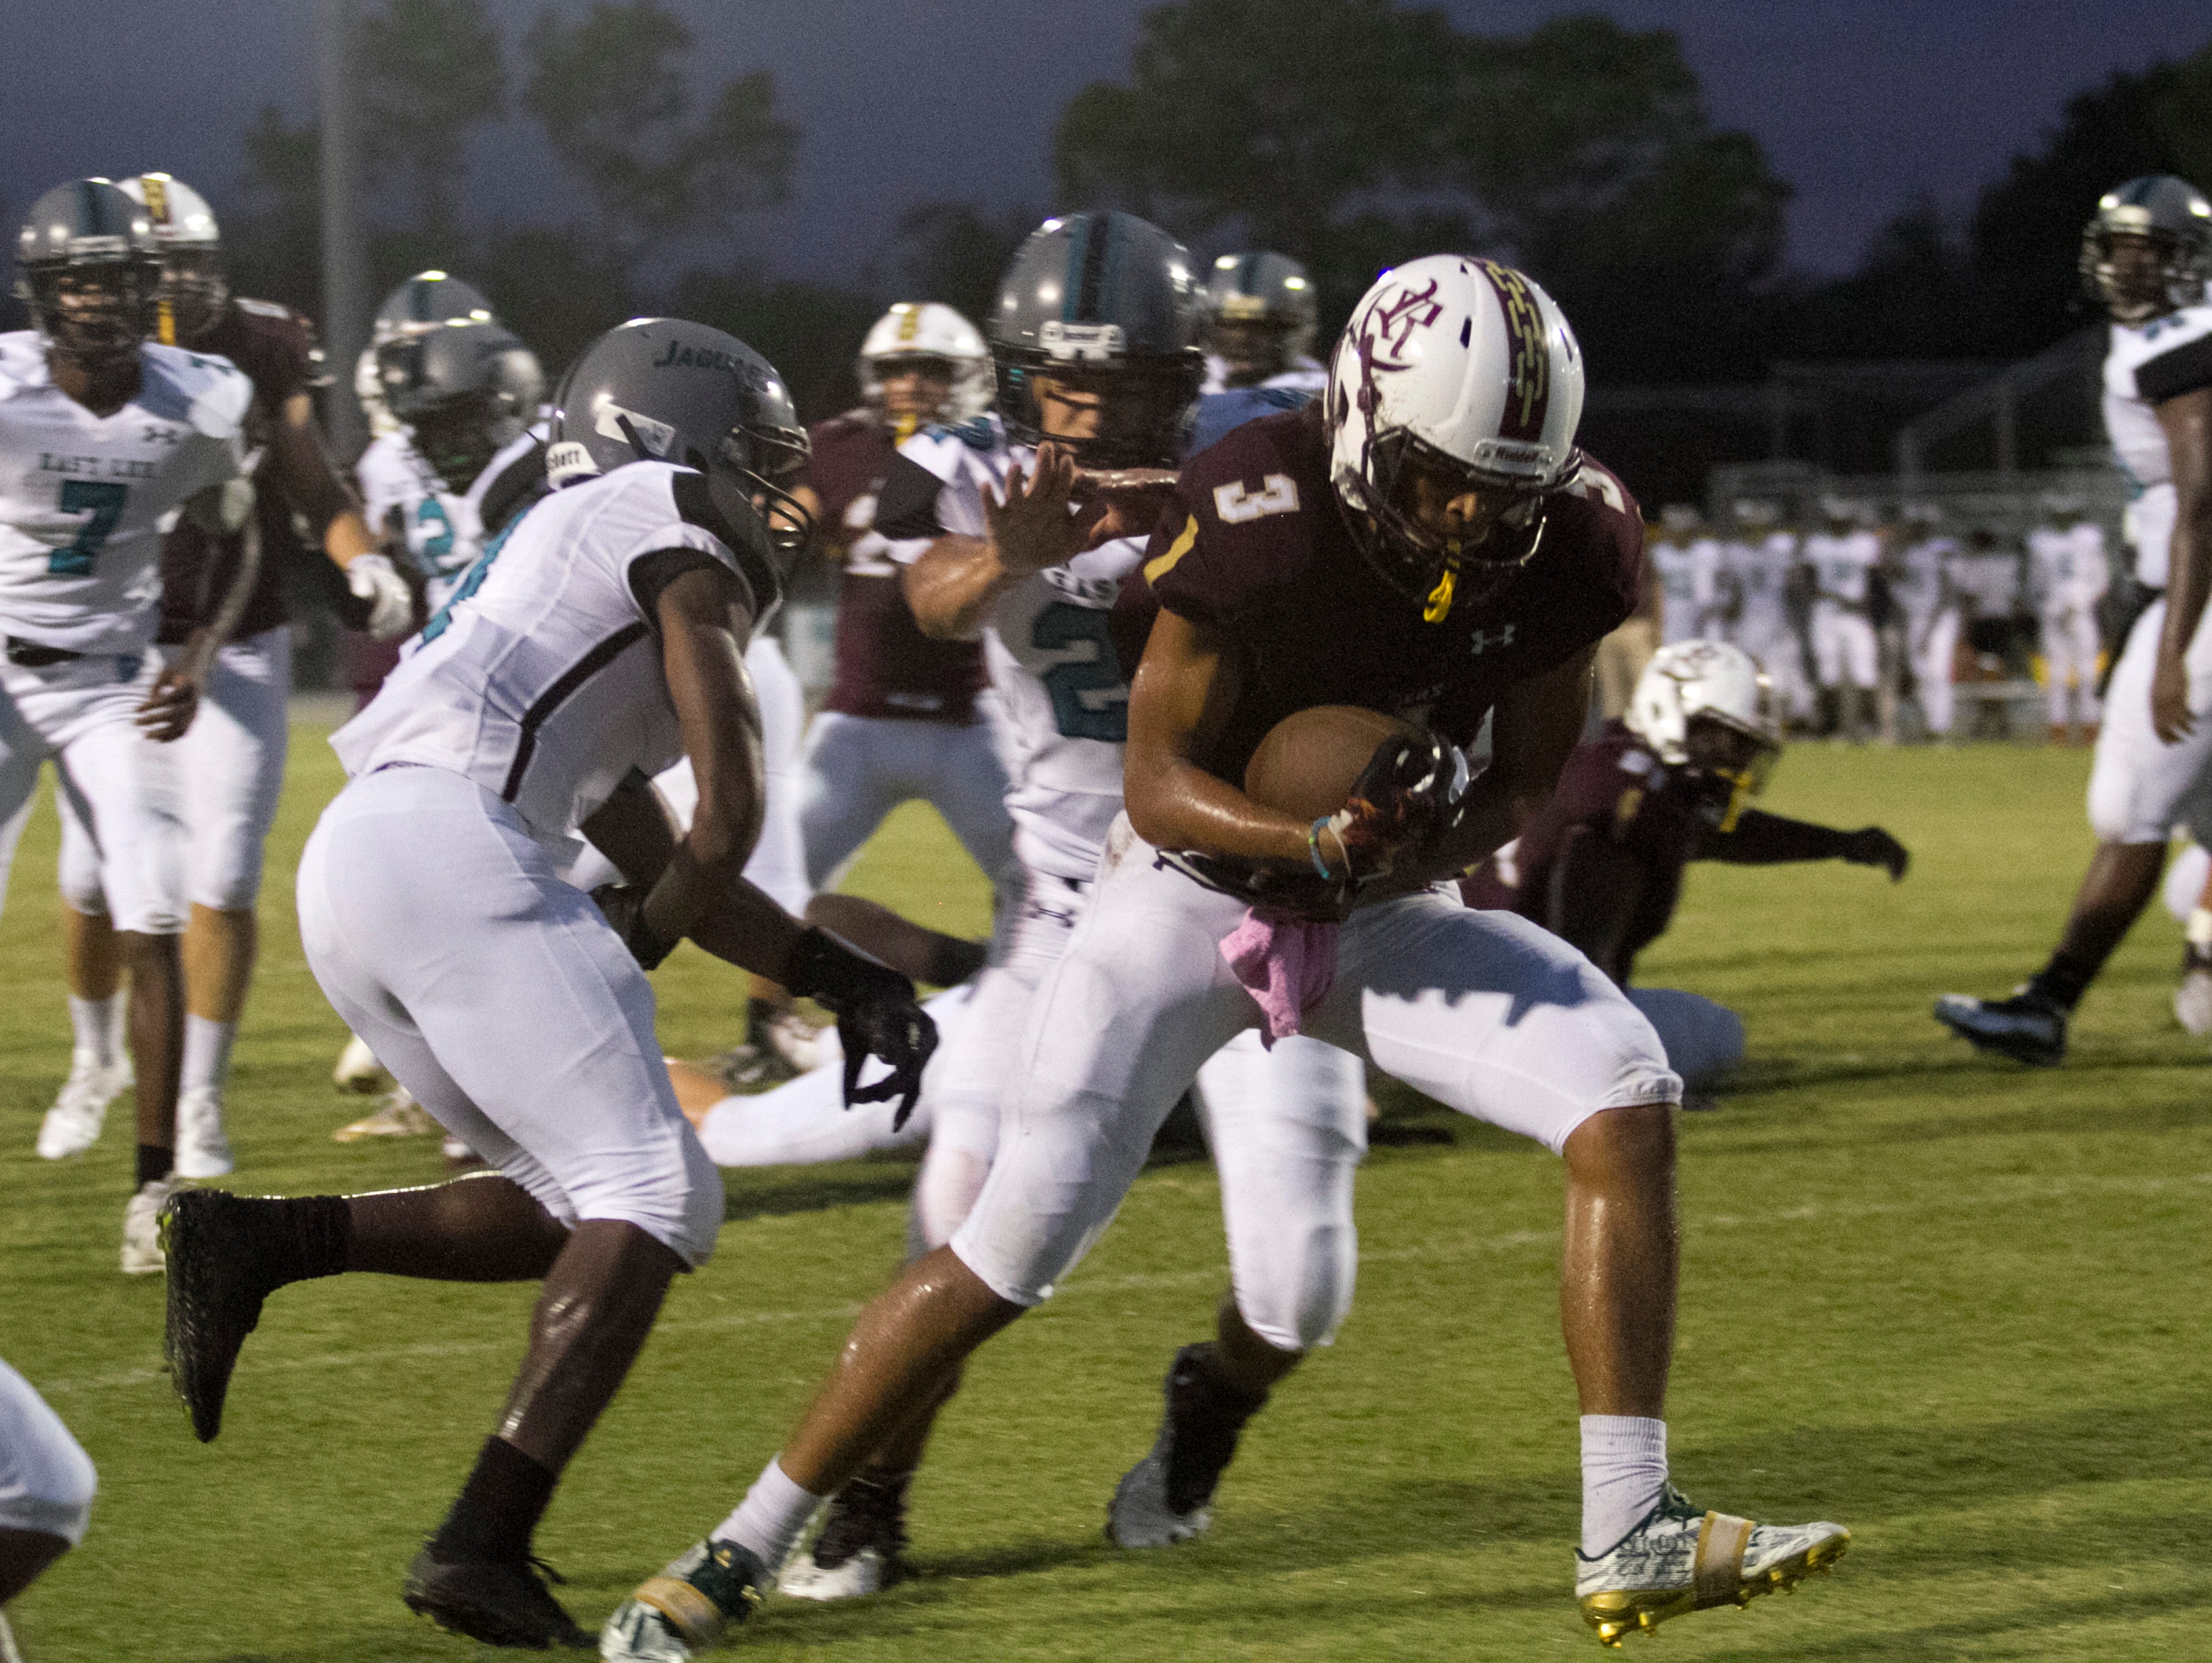 Riverdale's Jaylin Cochran scores the first touchdown against East Lee on Friday, September 16, 2016, at Riverdale High School.